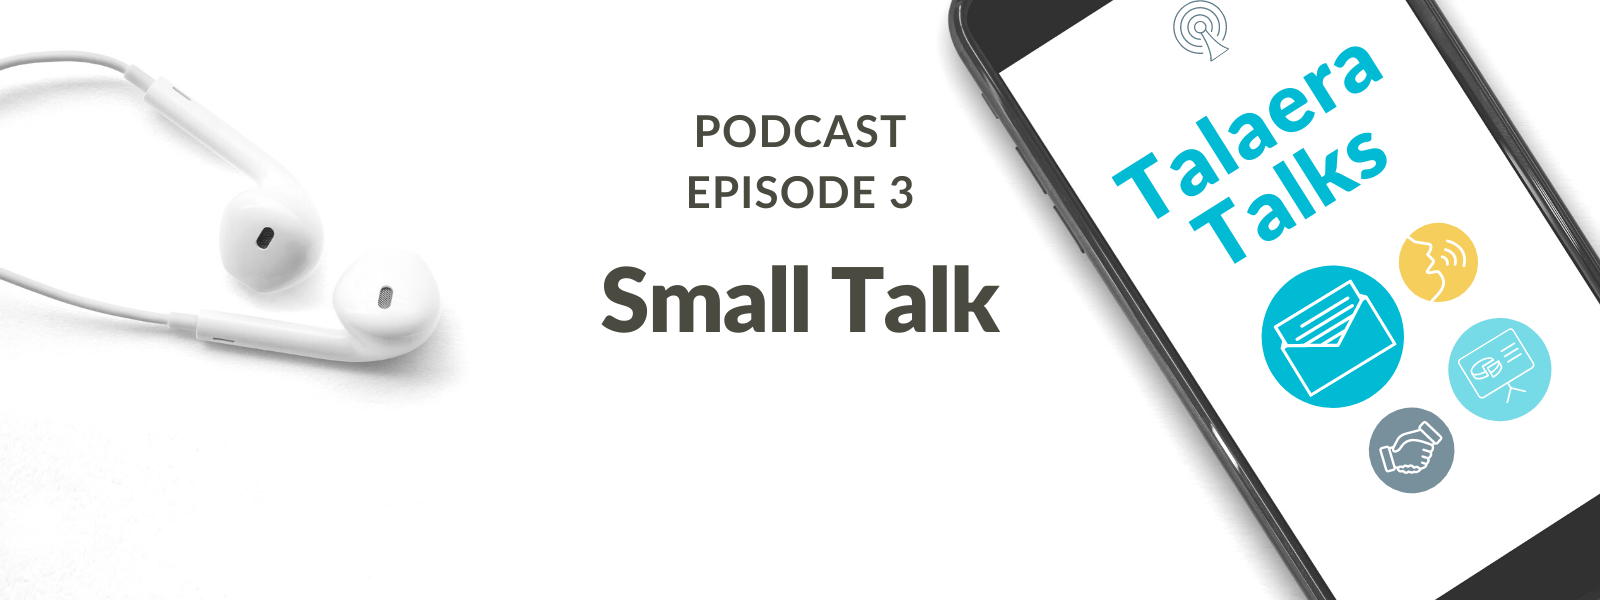 How To Make Small Talk Like a Native Speaker [Podcast]